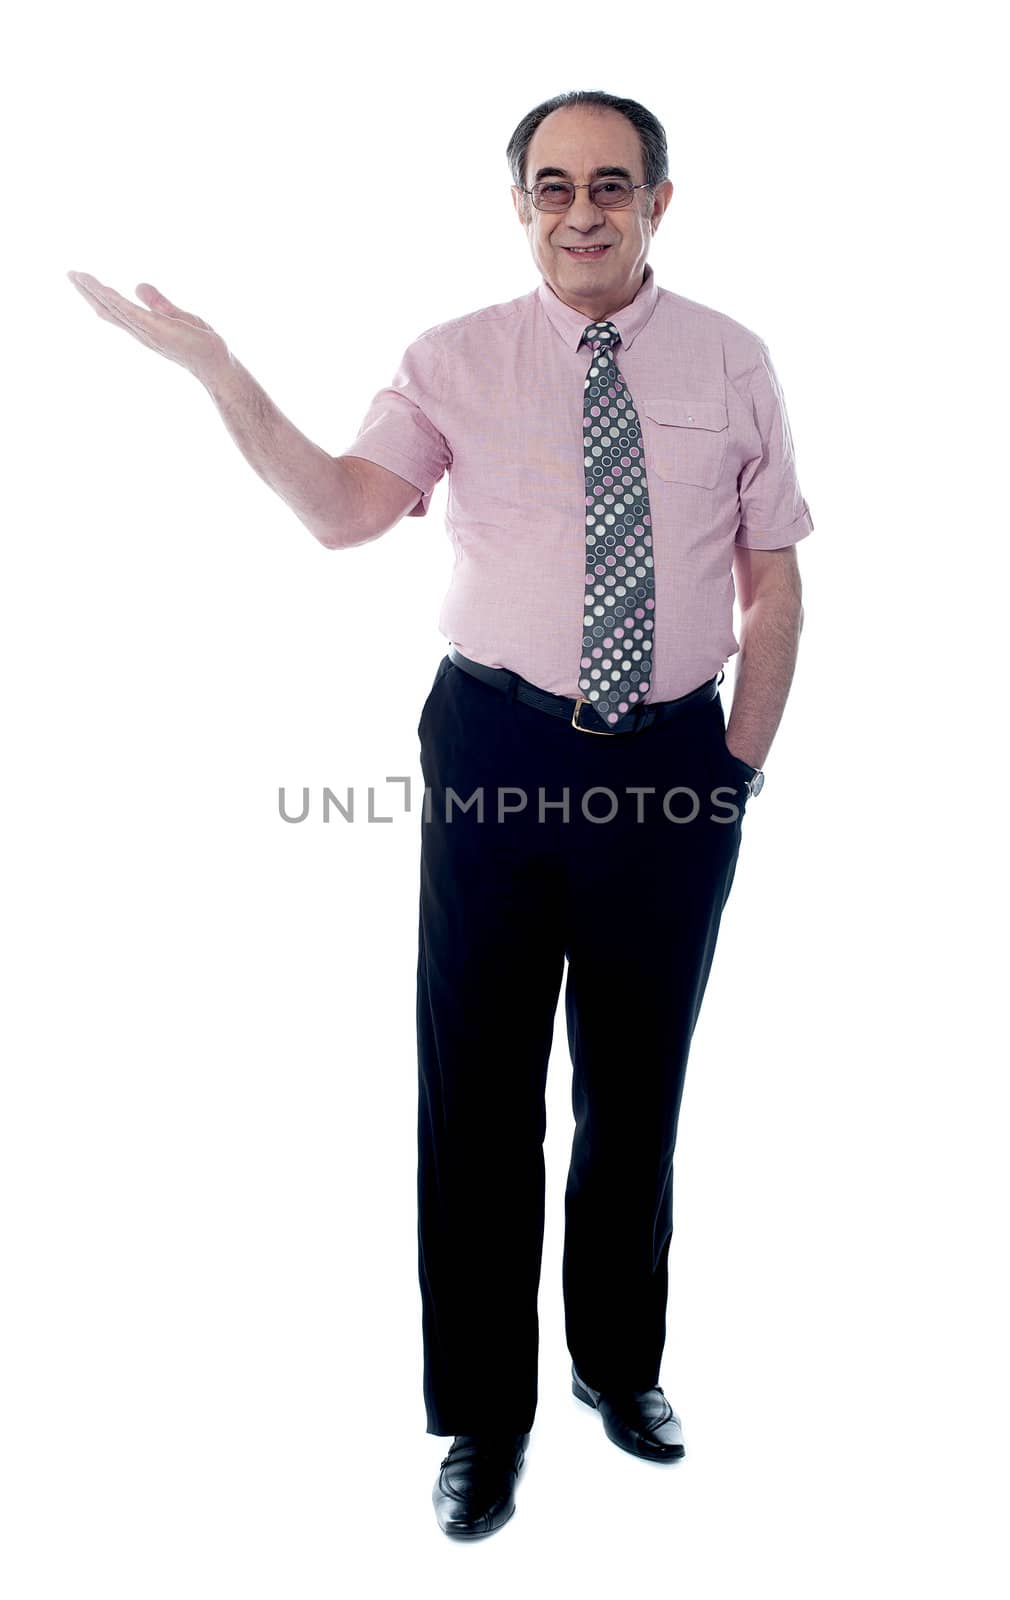 Senior boss posing with an open palm awith the other hand in pocket, stylish